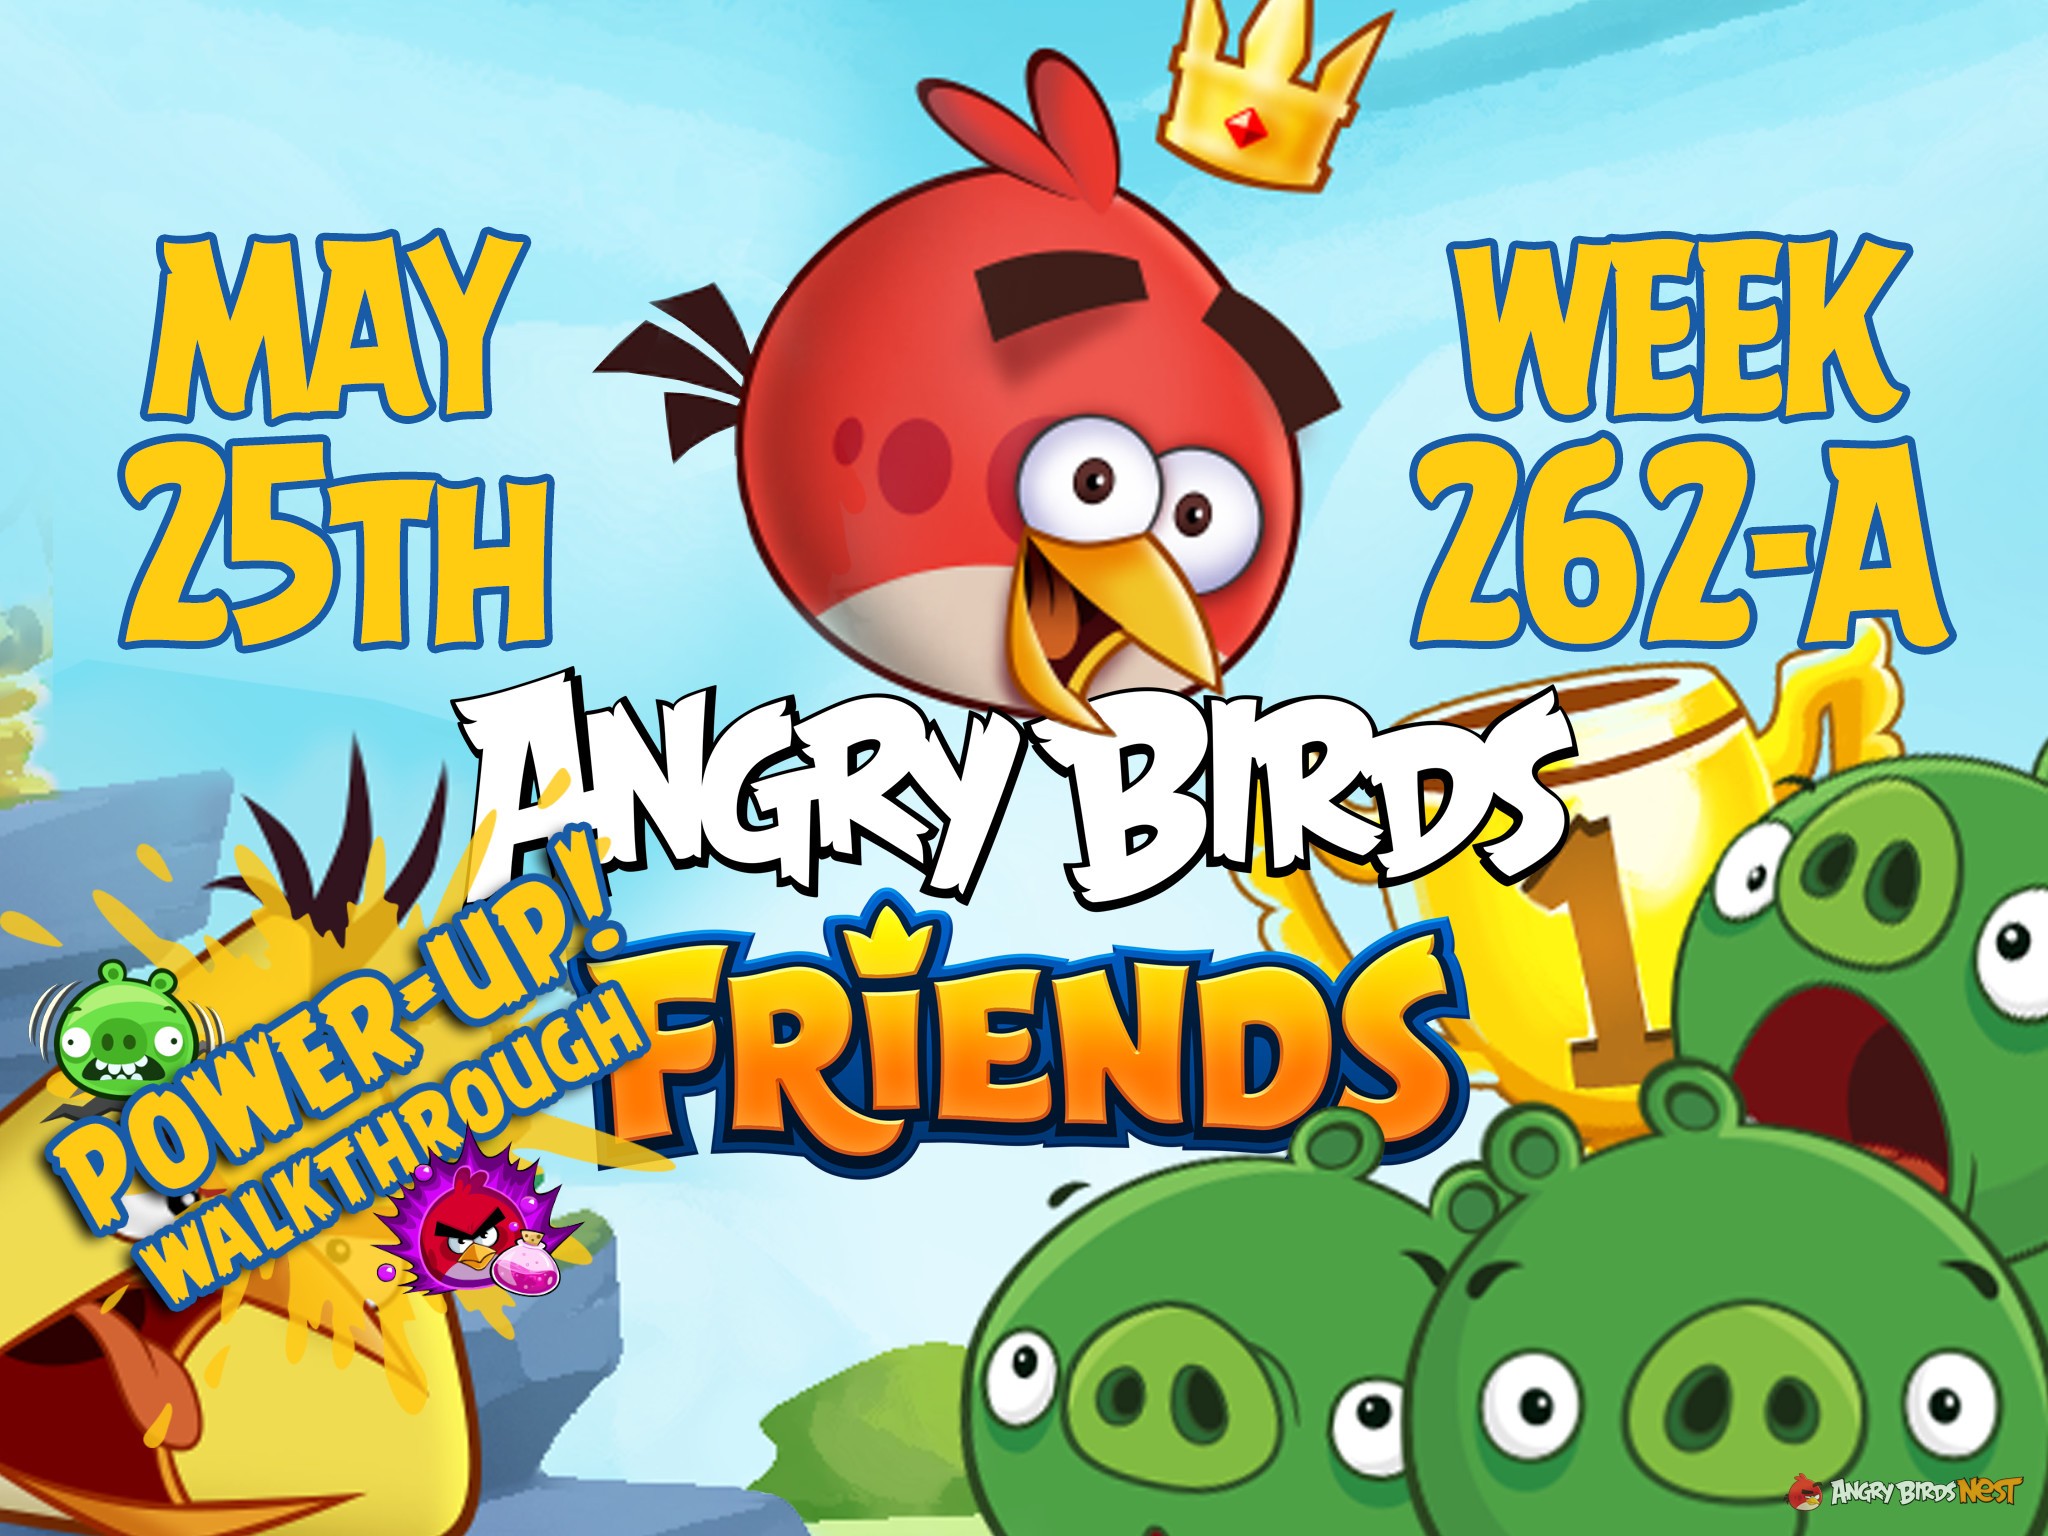 Angry Birds Friends Tournament Week 262-A Feature Image PU